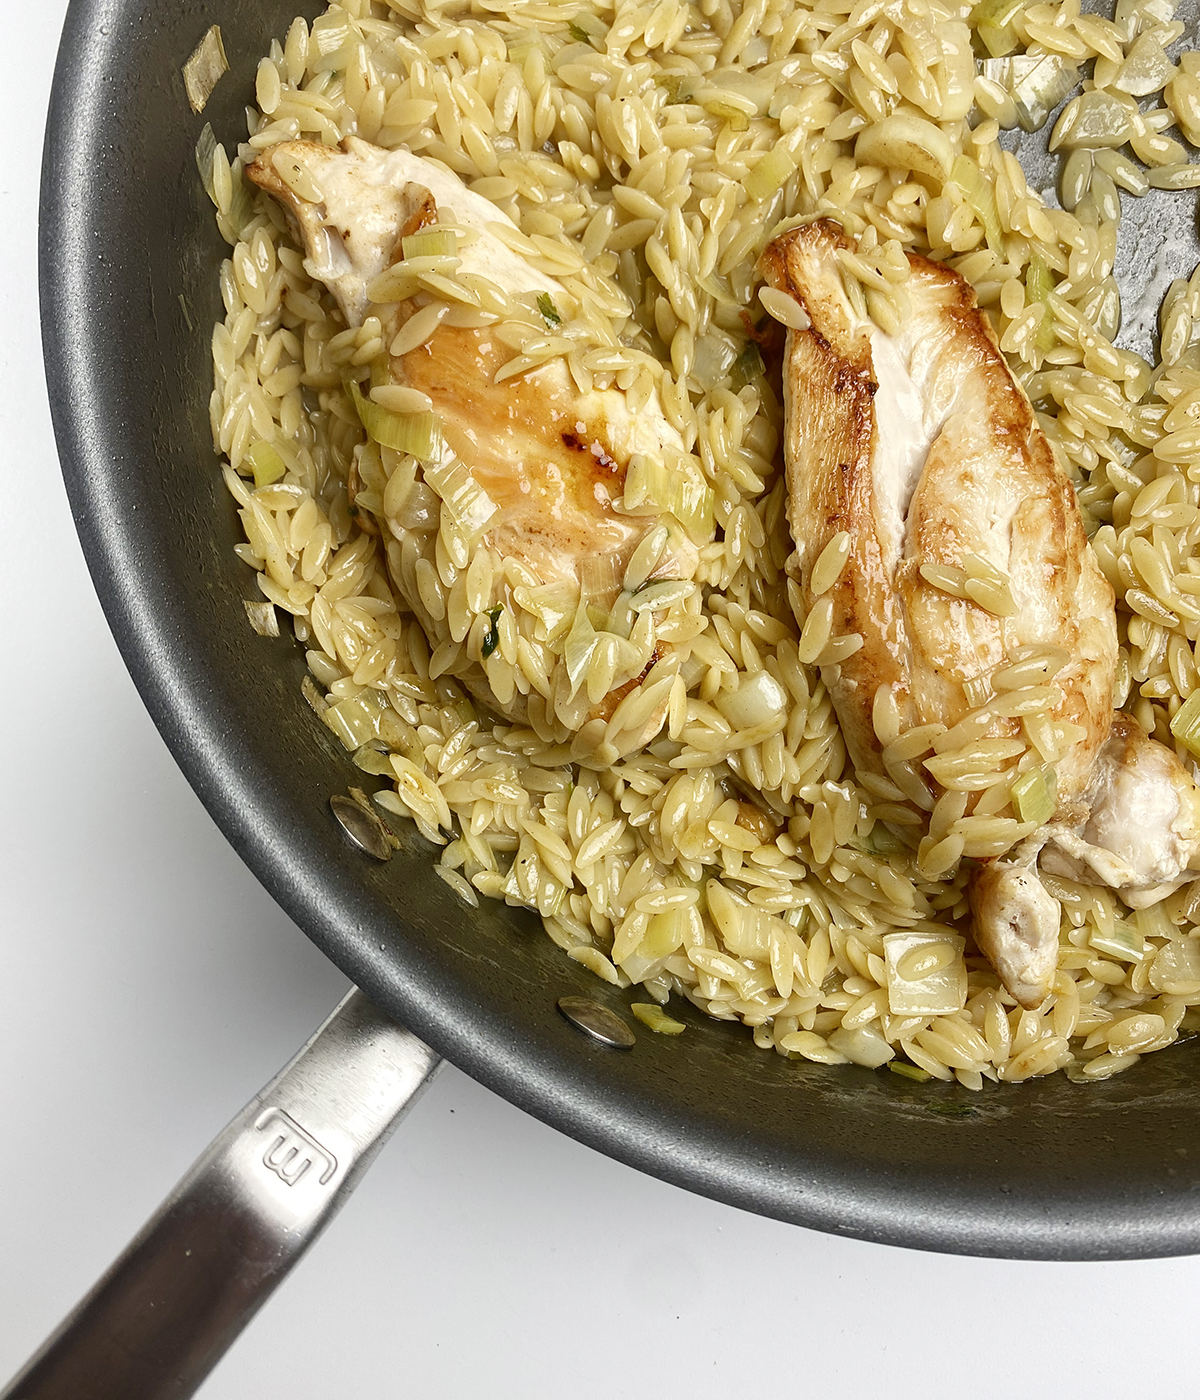 Lemon chicken with orzo in a skillet